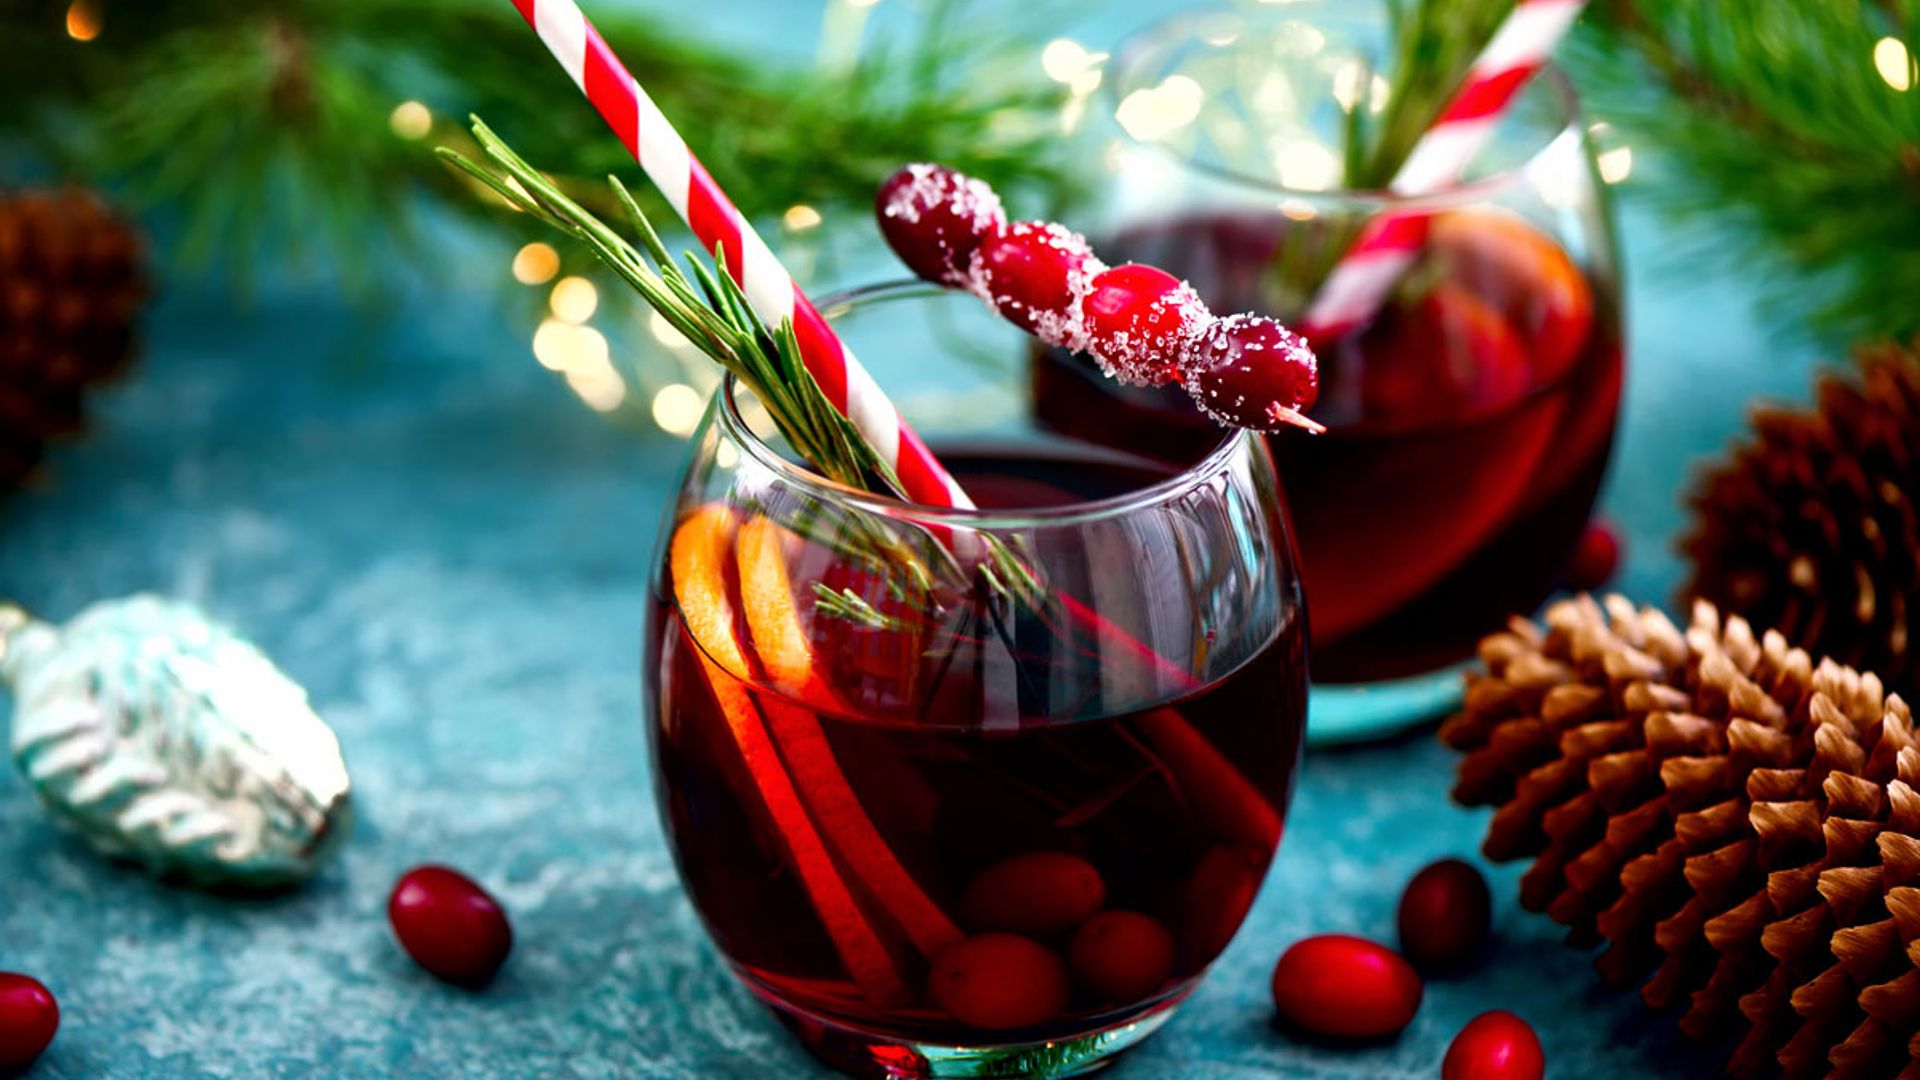 Find out what Christmas drink you should be sipping based on your star sign